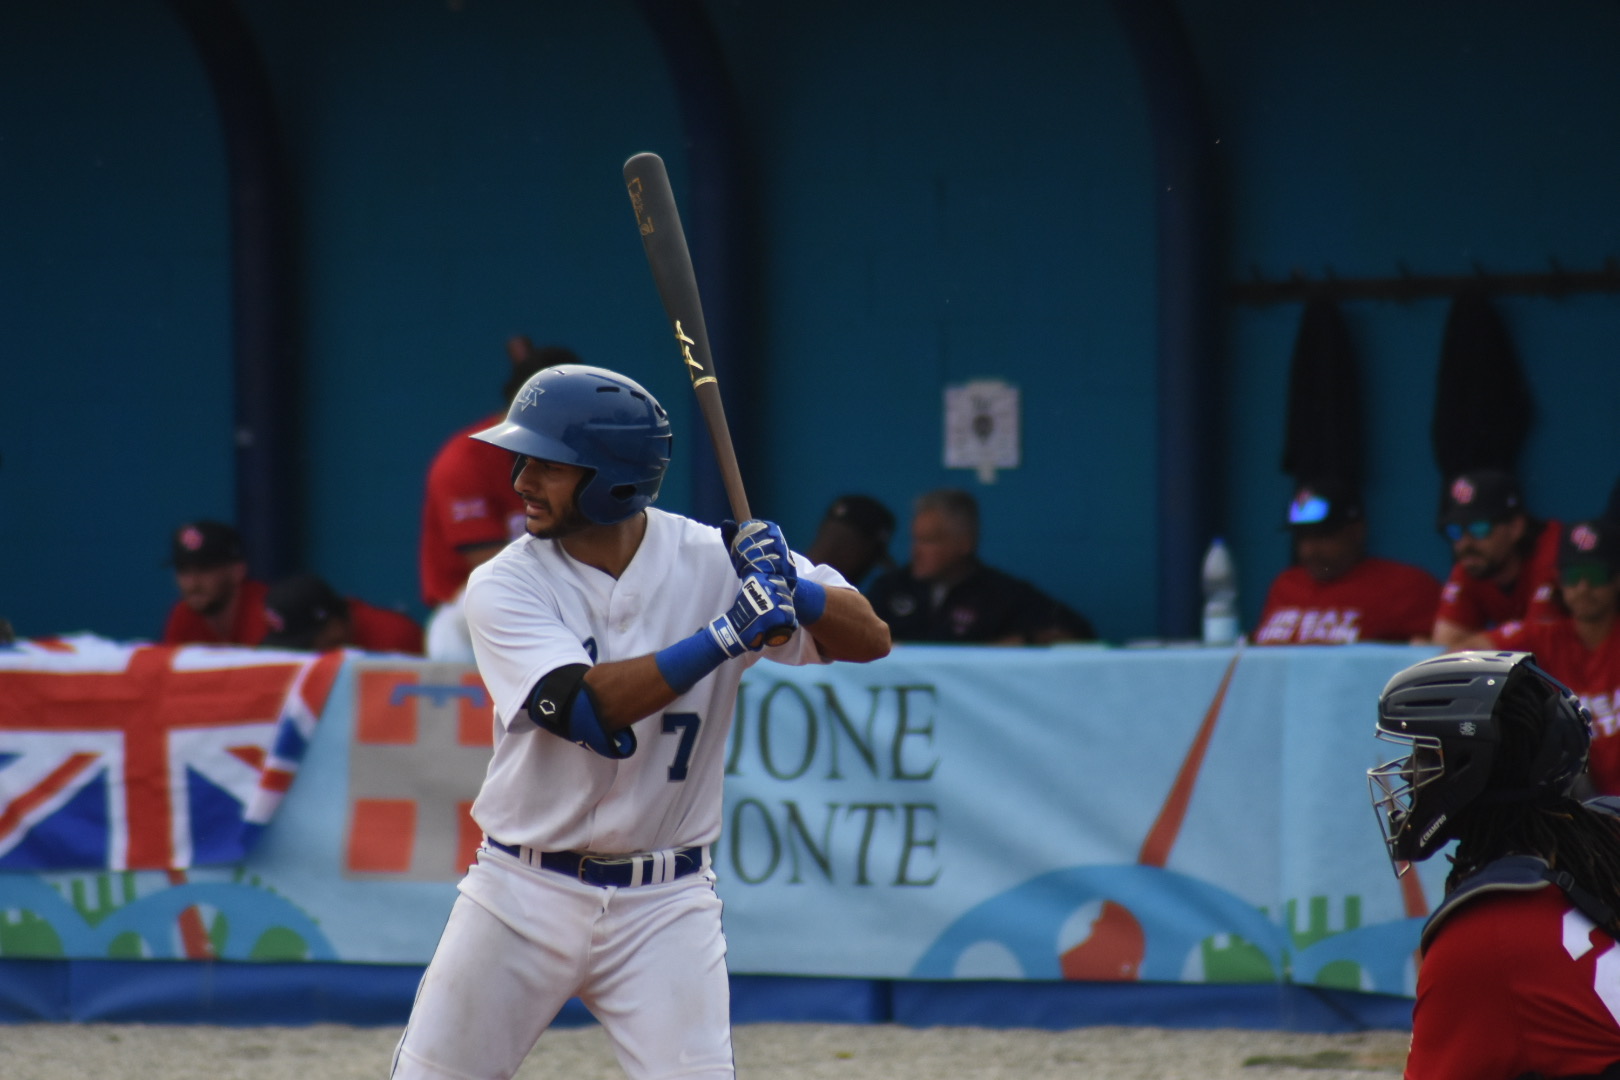 Tal Erel goes to bat for Team Israel in this undated photo. (Courtesy IAB)